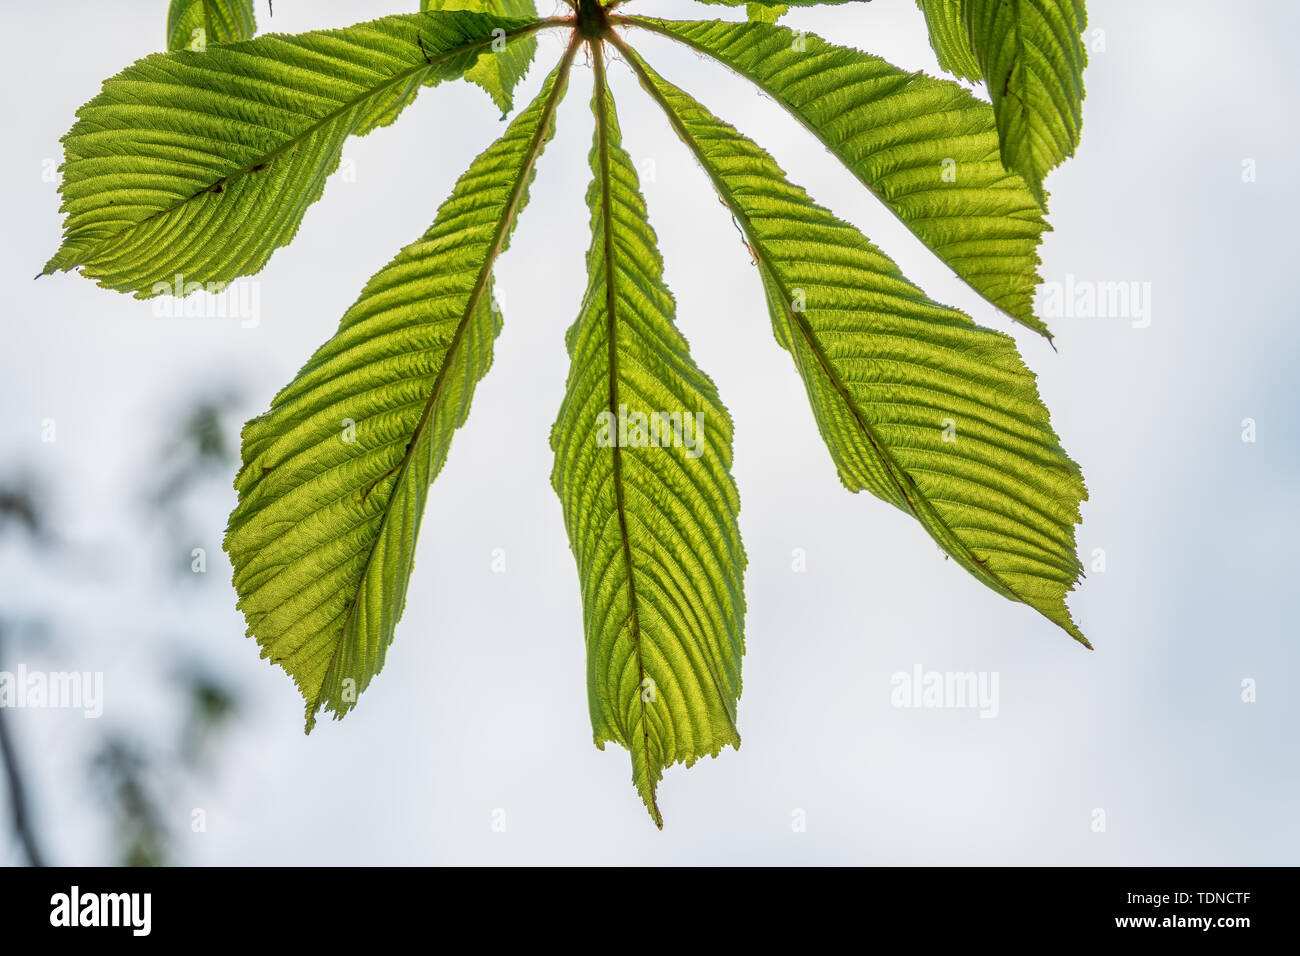 Green chestnut leaves lie like a fan on the background of a bright sky. Stock Photo